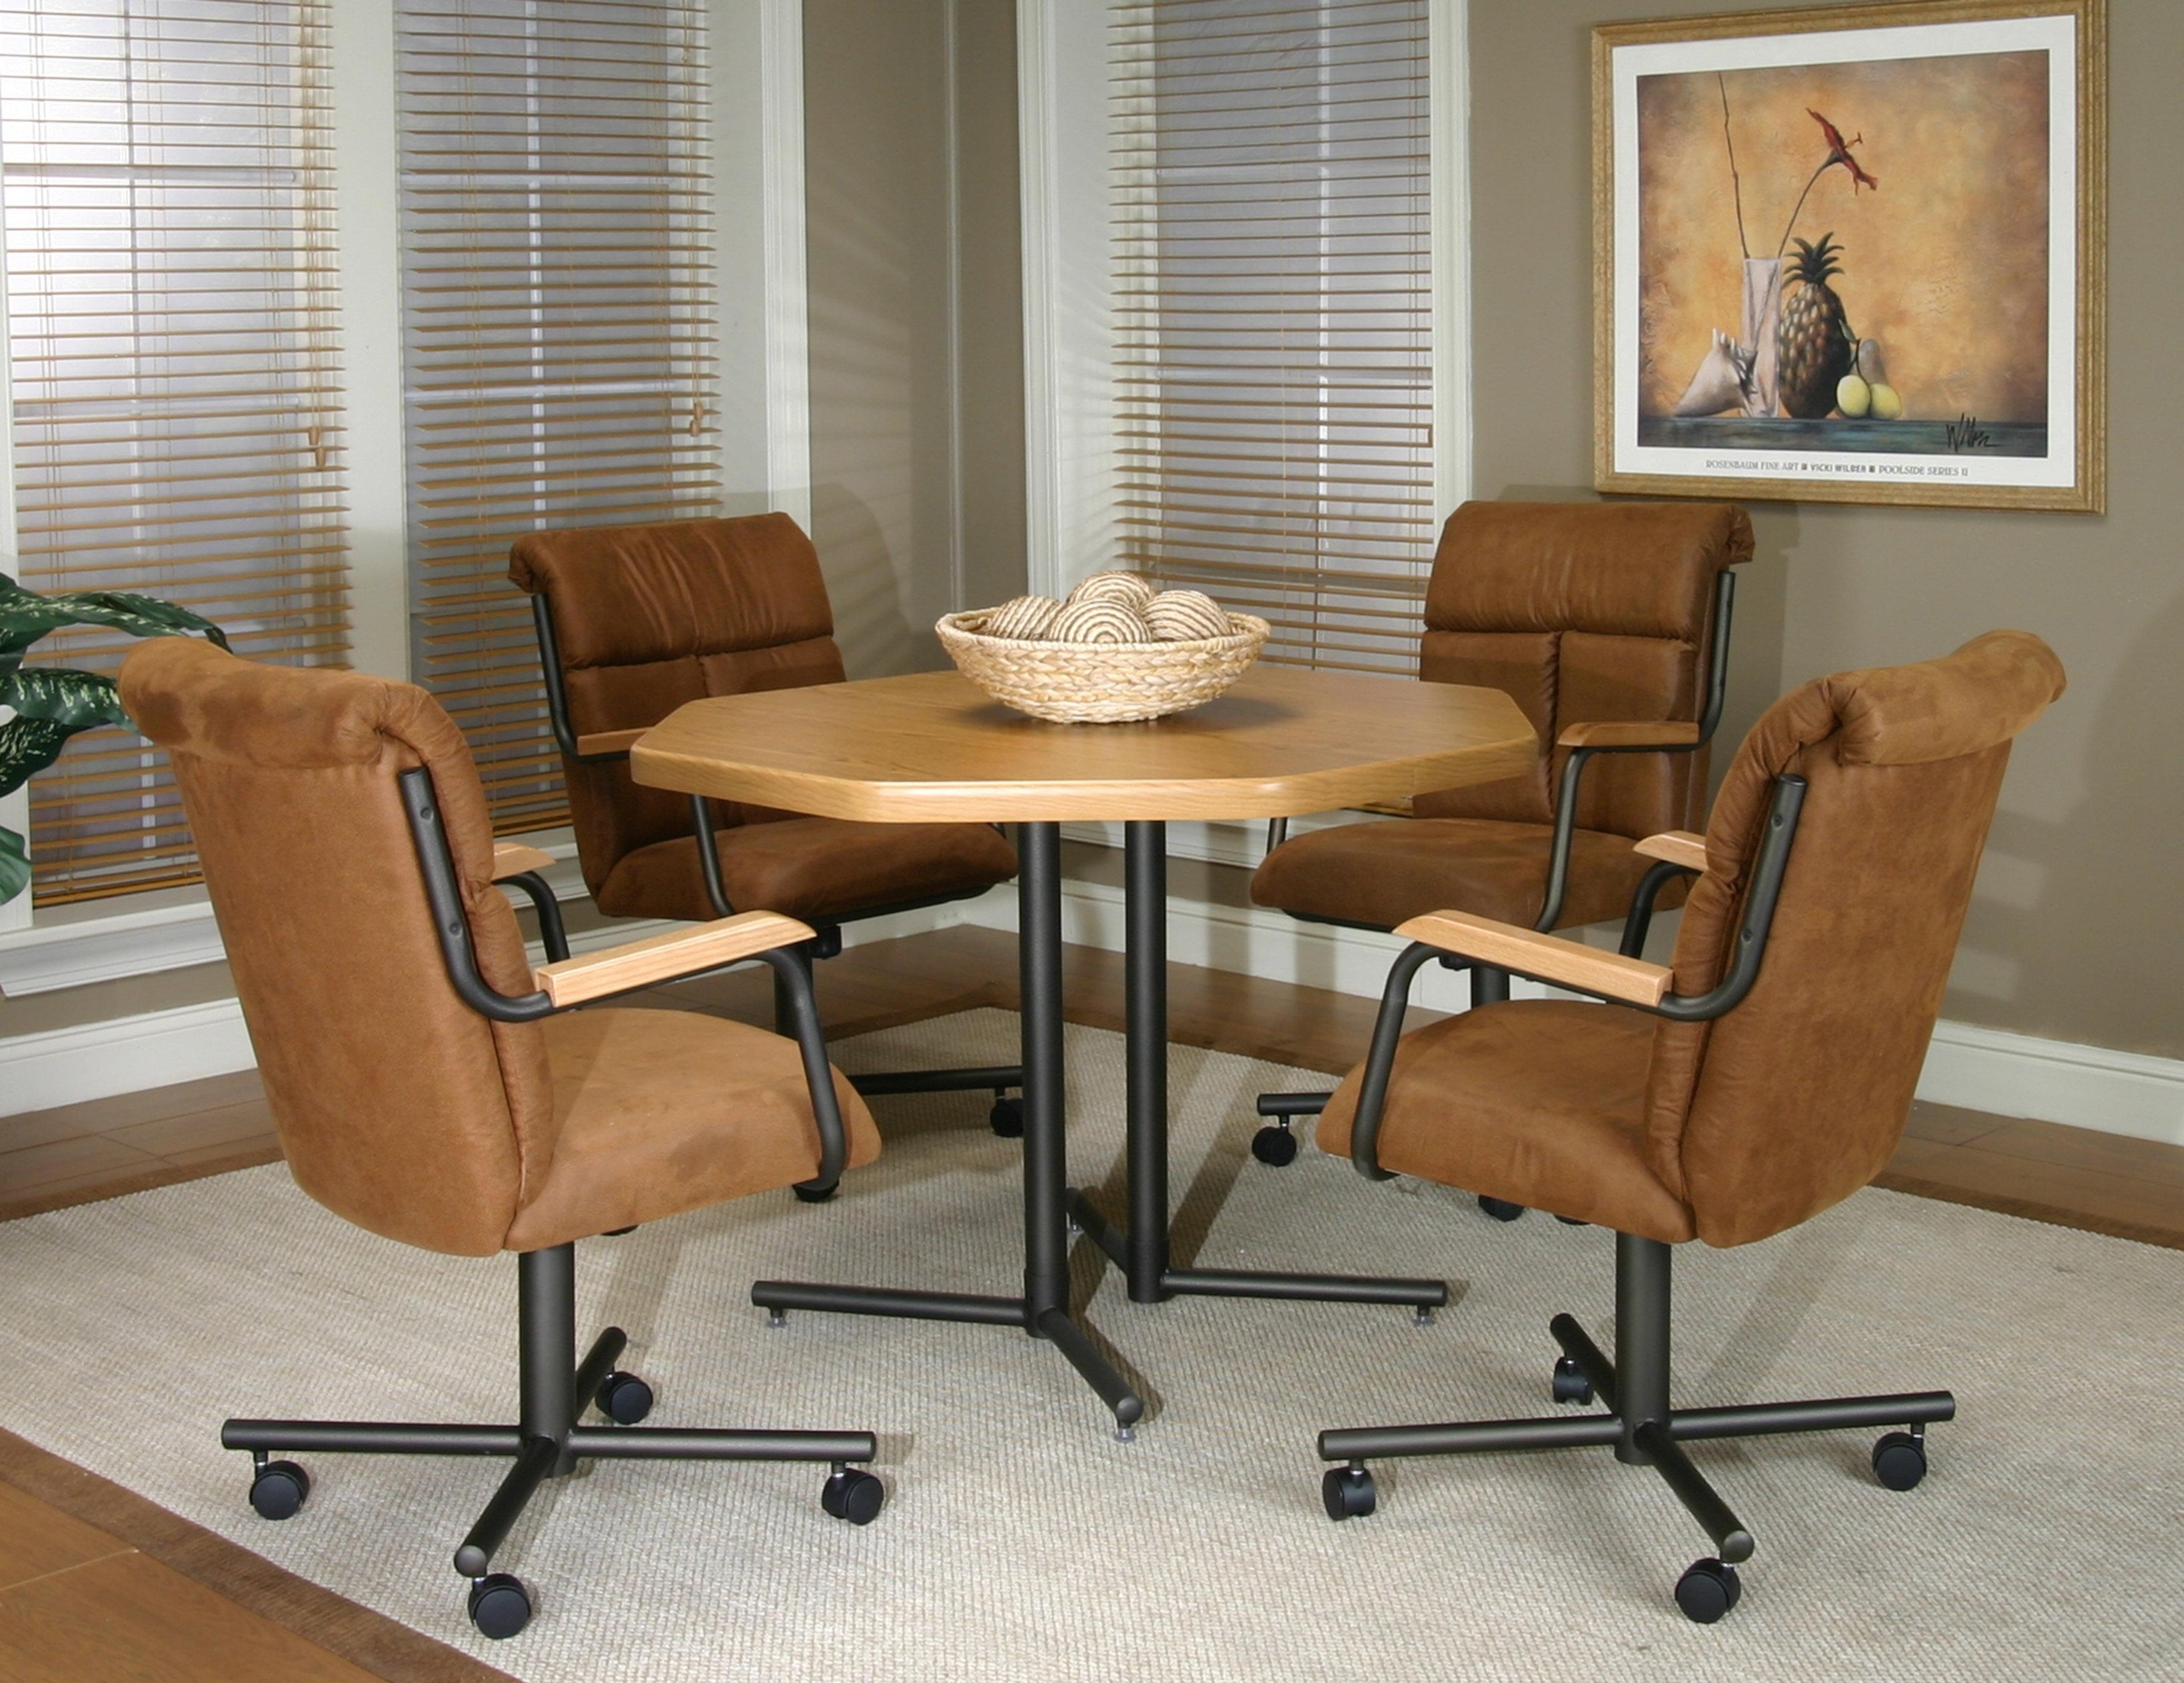 Dining Chairs With Casters Visualhunt, Leather Dining Chairs With Casters